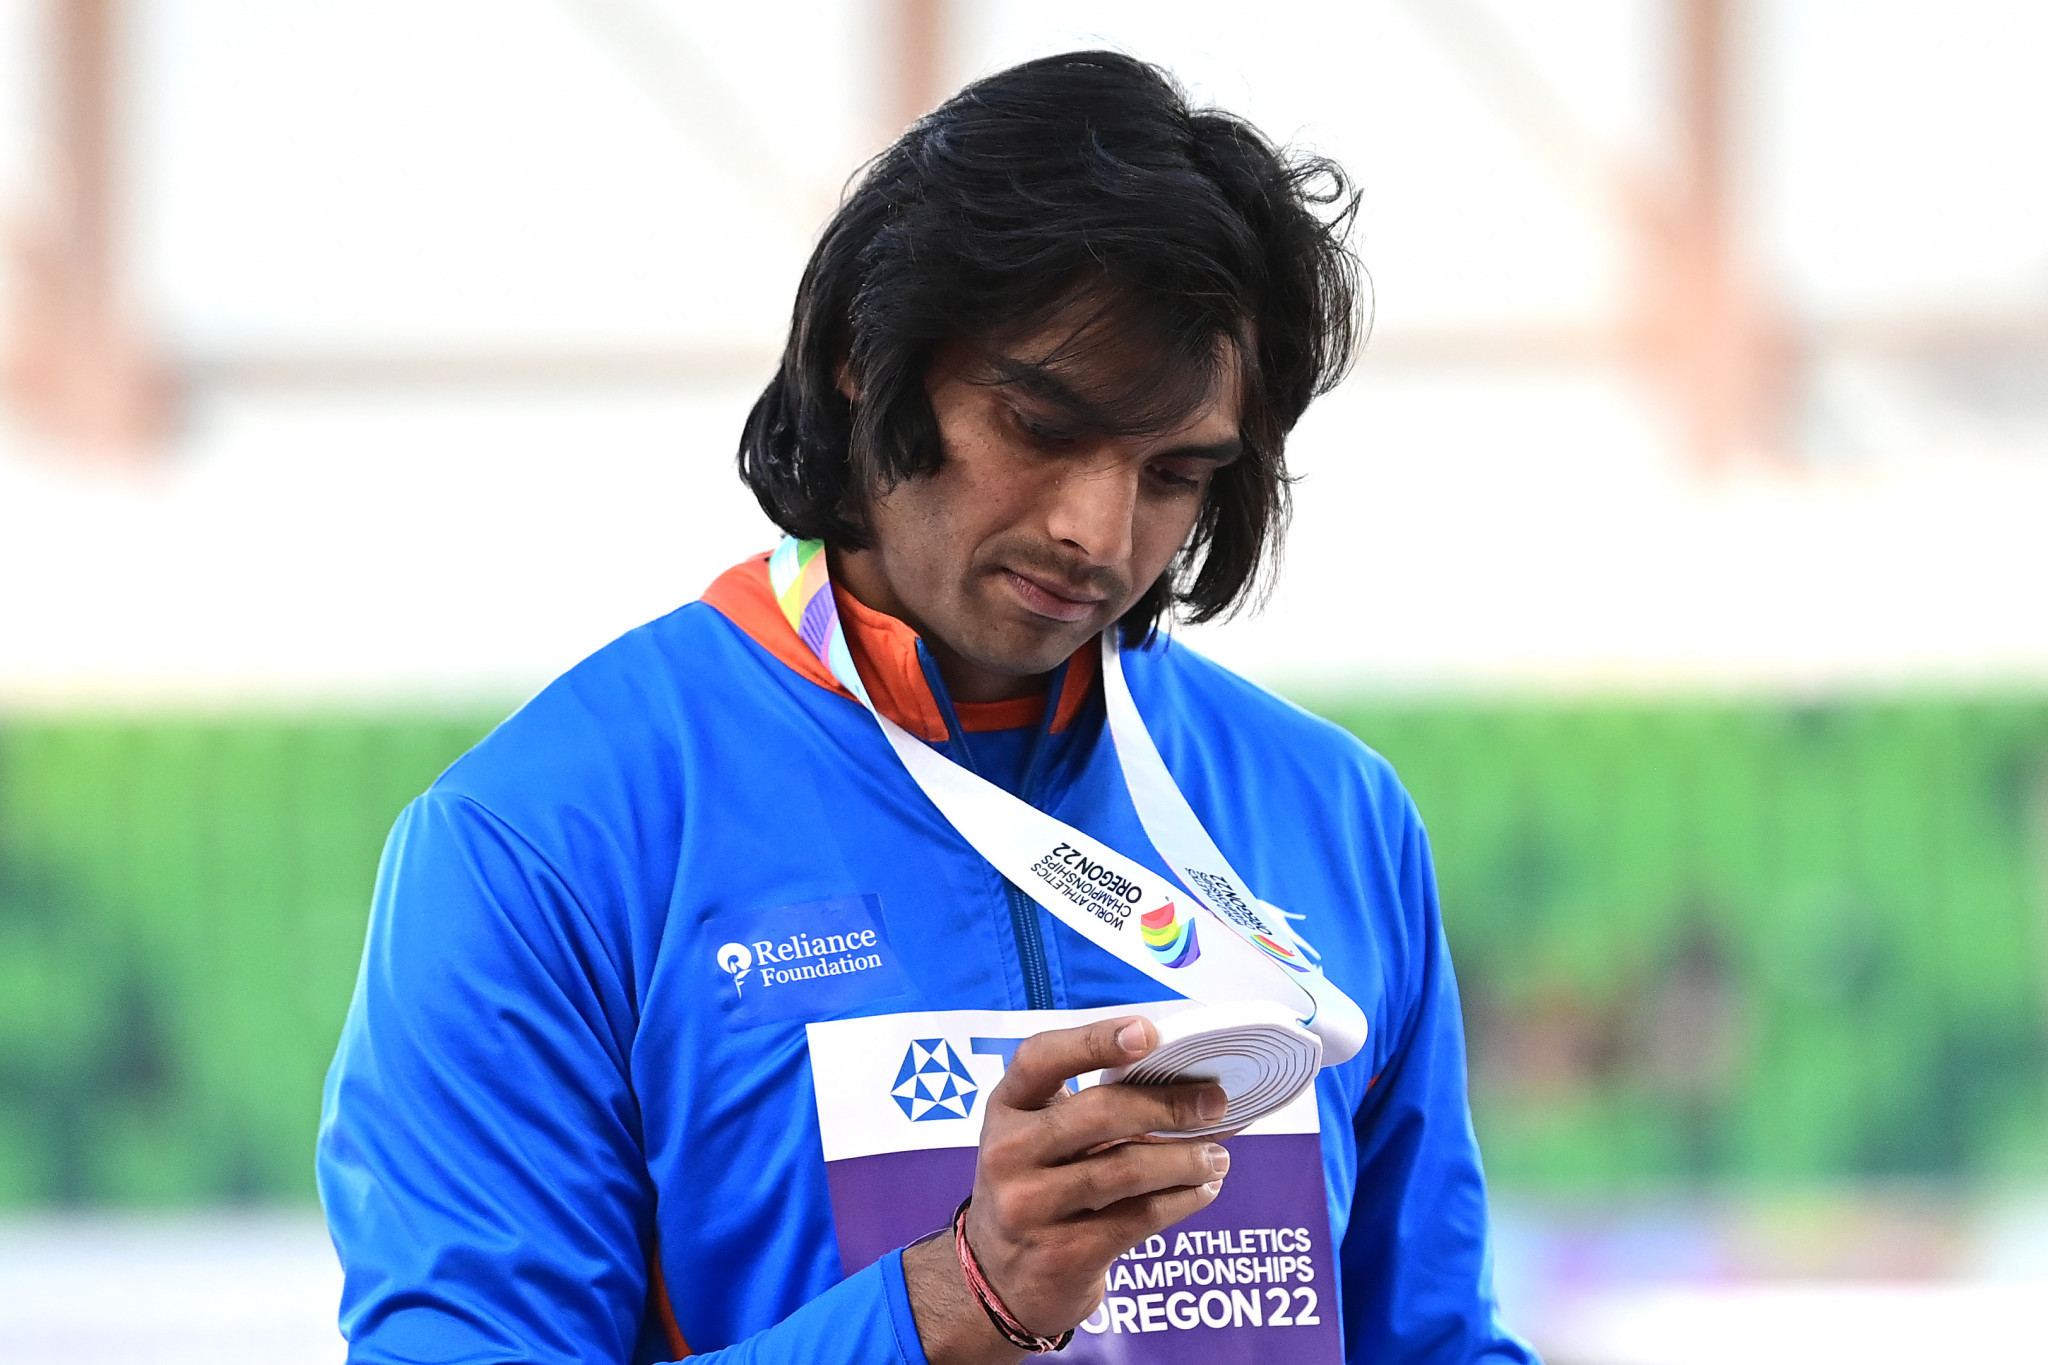 India’s Olympic champion Neeraj Chopra settled for silver in the men's javelin with an effort of 88.13m ©Getty Images